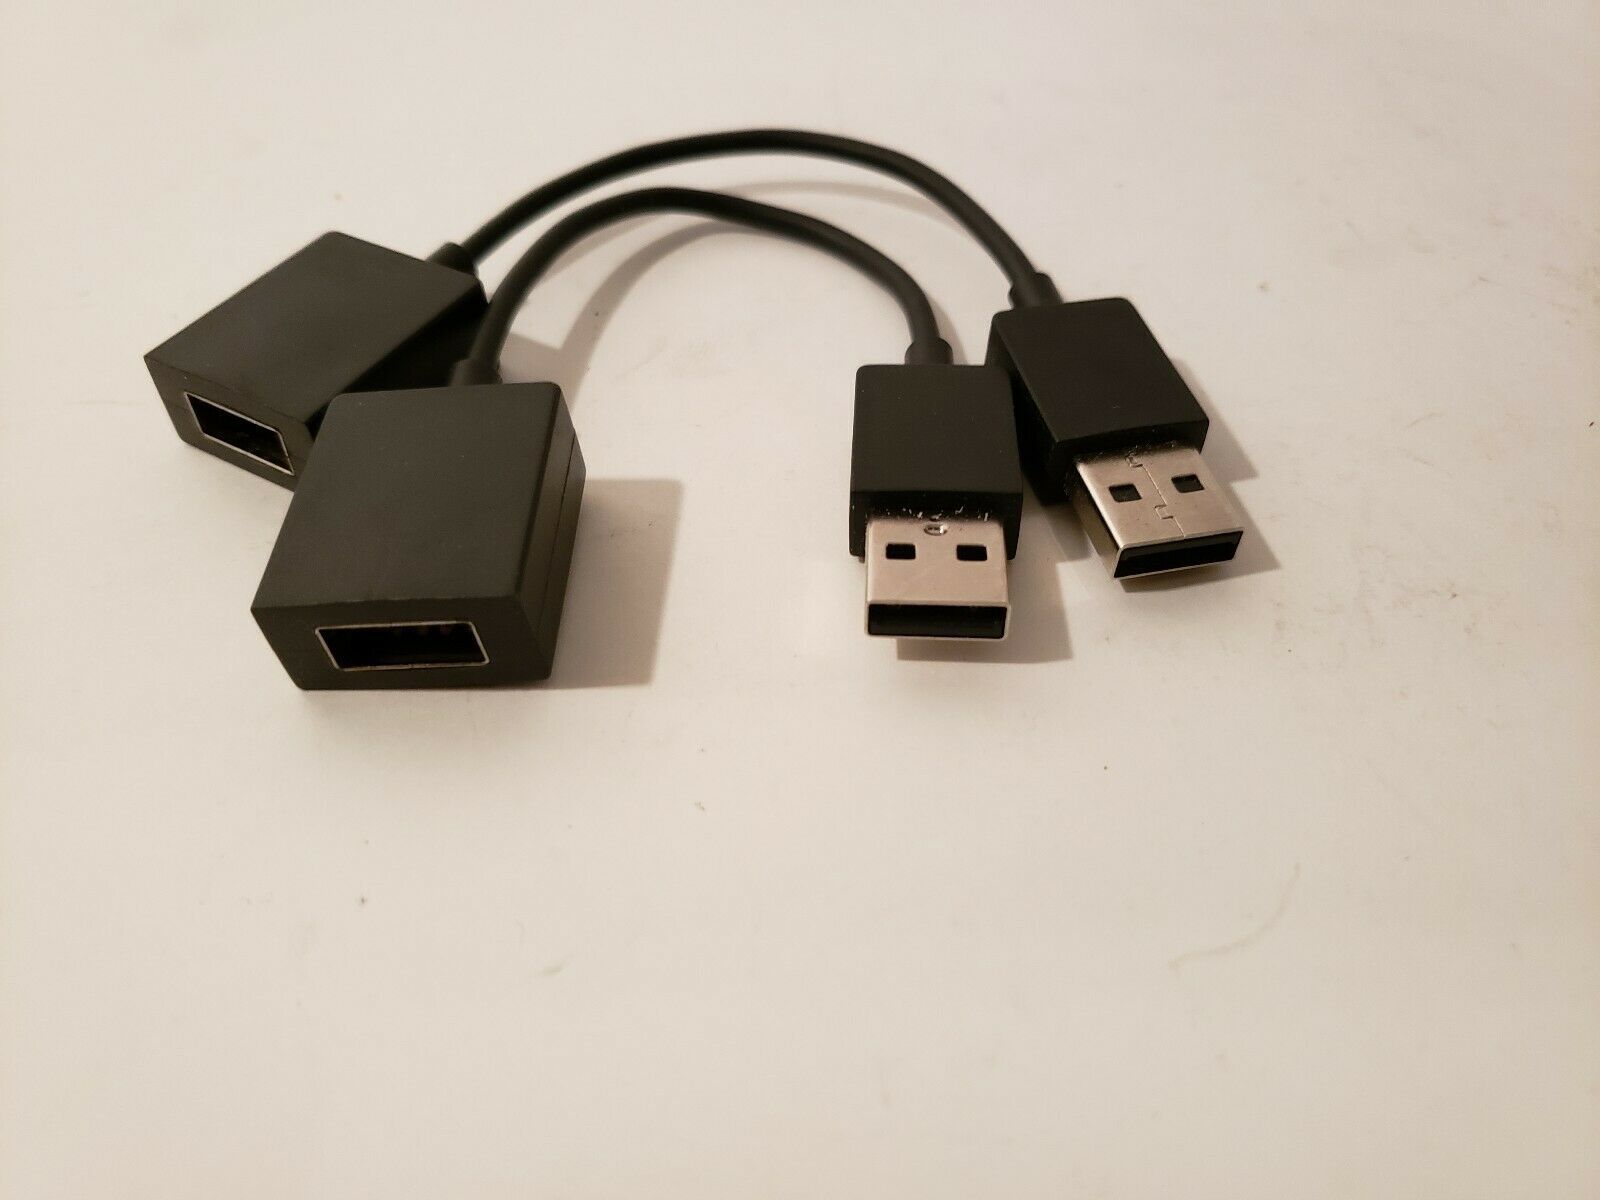 Usb Cable Extender one end is Male, other end is female -  BUY 3 FOR 7.99 - $8.70